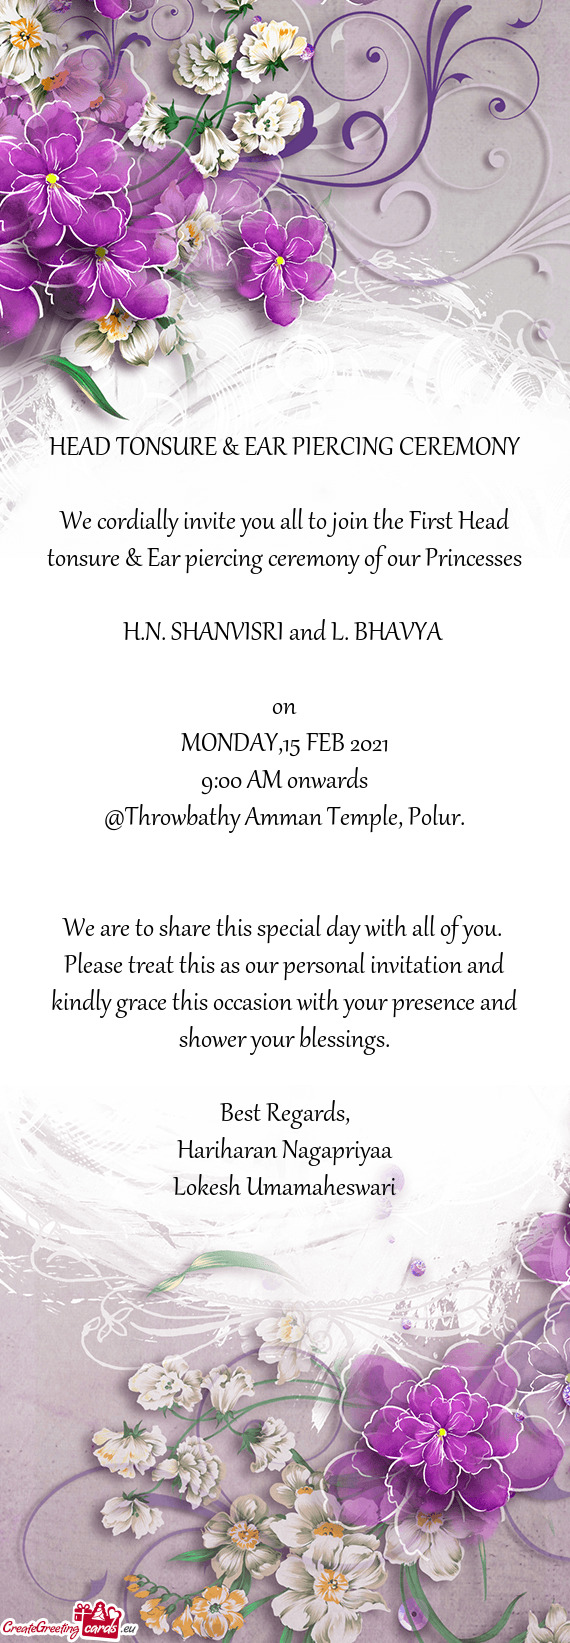 We cordially invite you all to join the First Head tonsure & Ear piercing ceremony of our Princesses